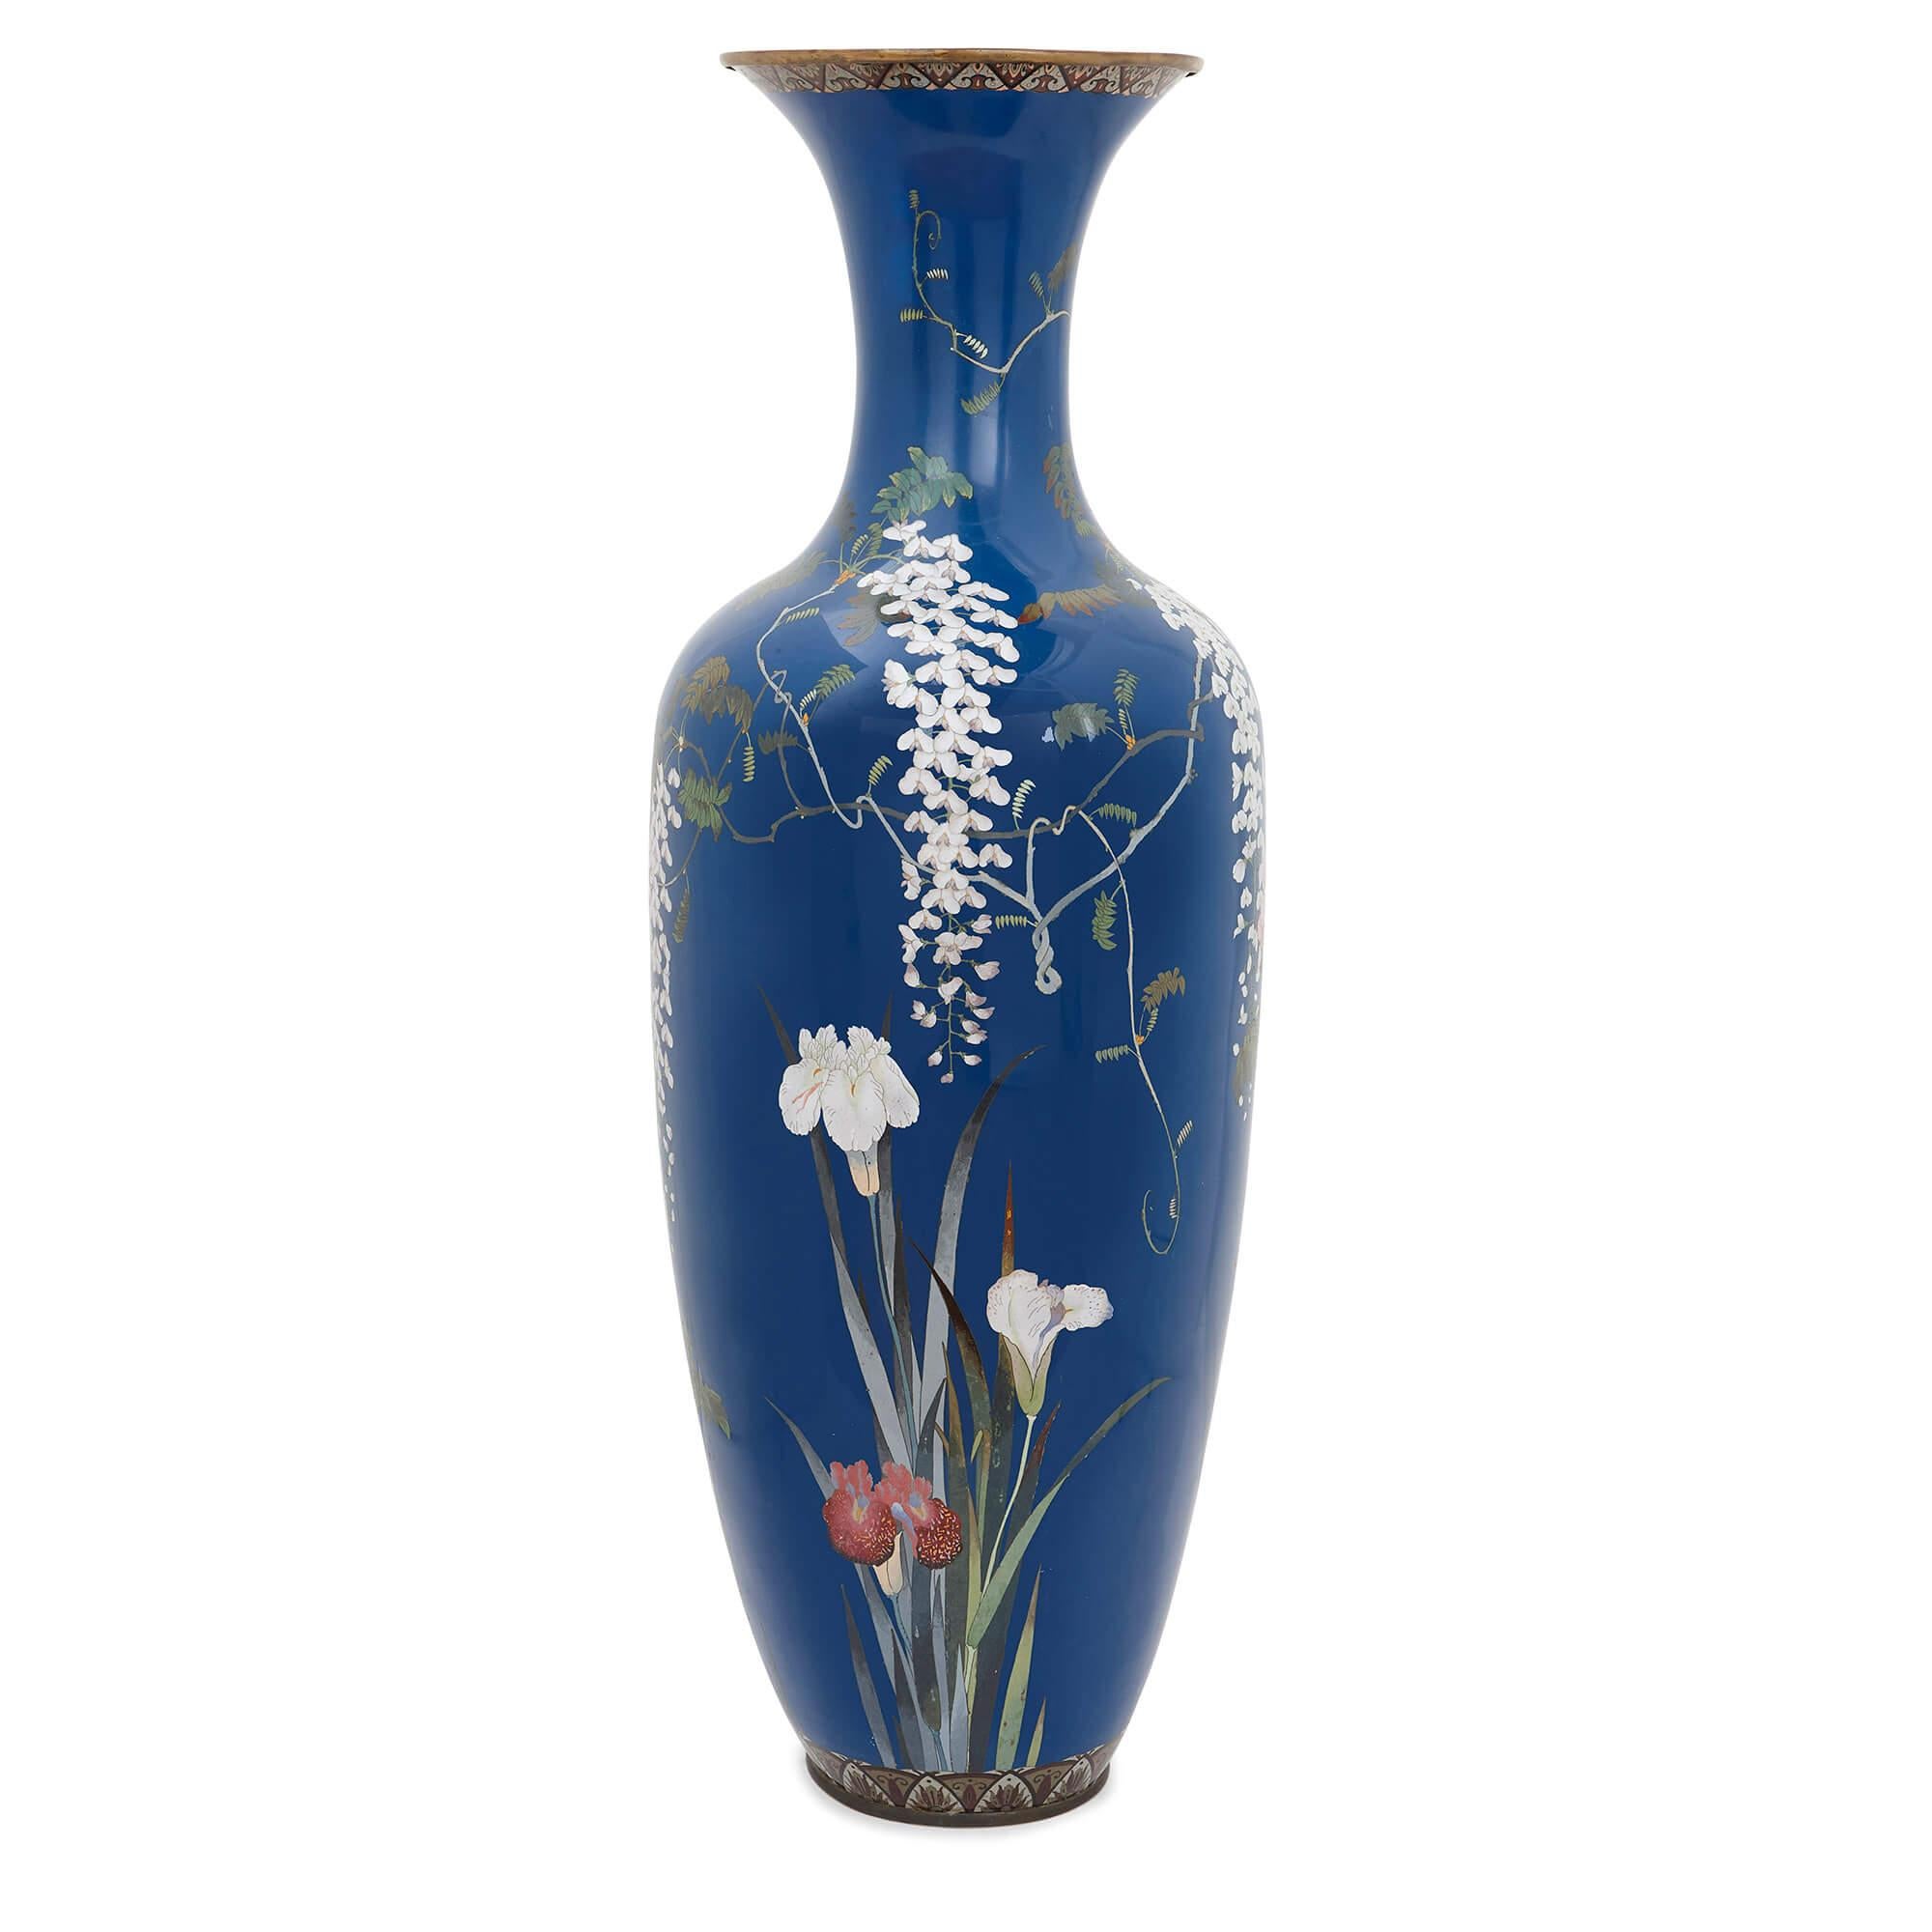 This stunning Meiji period vase is a wonderful example of the quality of craftsmanship during the late 19th century Japanese Meiji period. The Meiji era was famed for being the period in which Japan started to trade openly with the world, and in